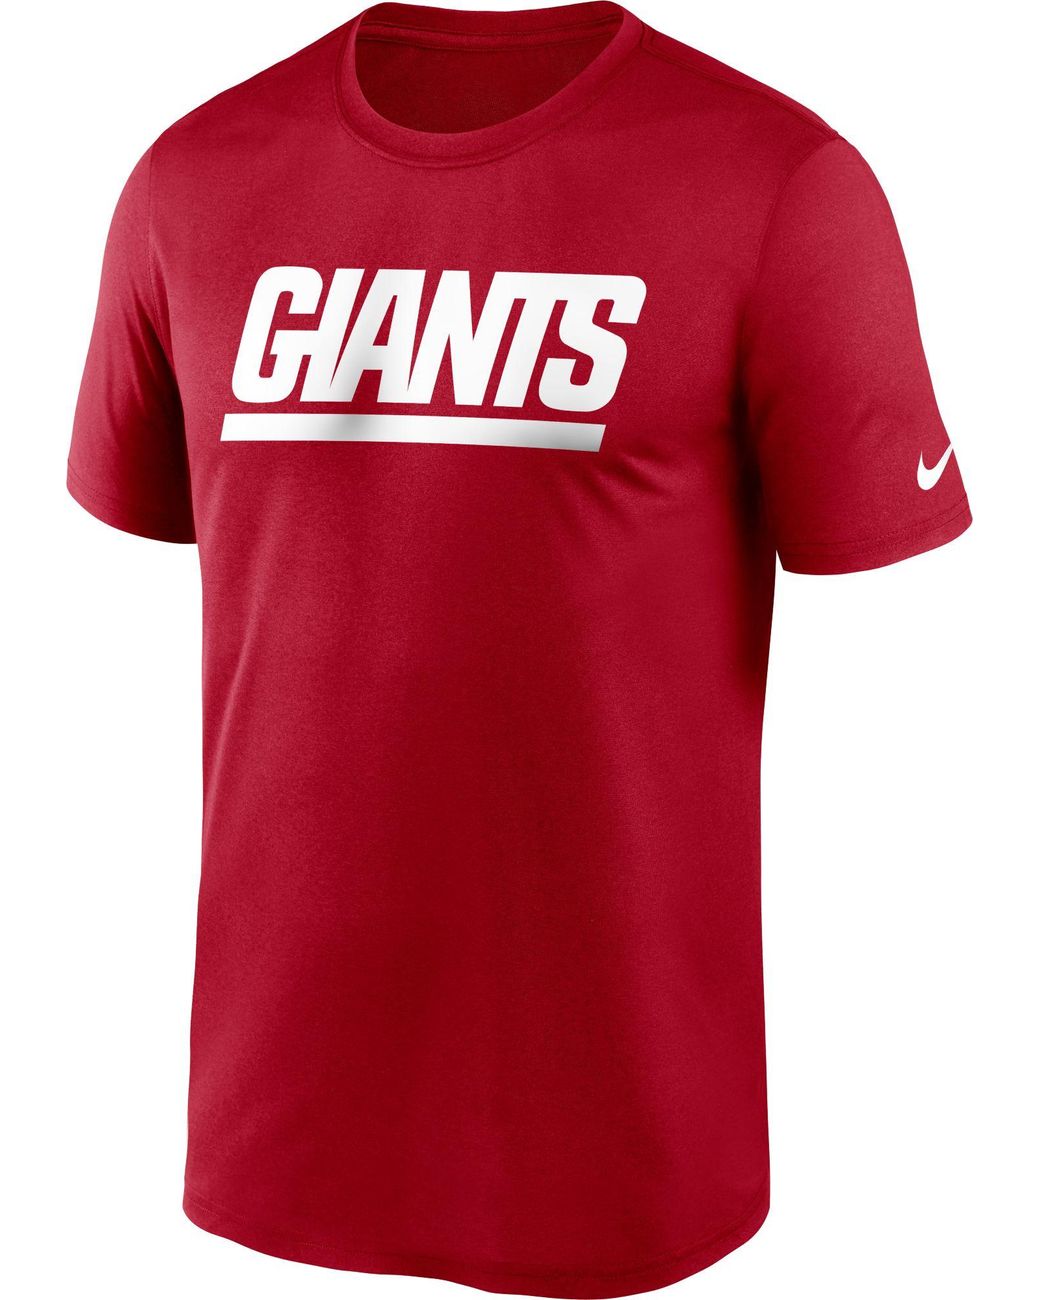 Nike New York Giants Sideline Dri-fit Cotton T-shirt in Red for Men - Lyst